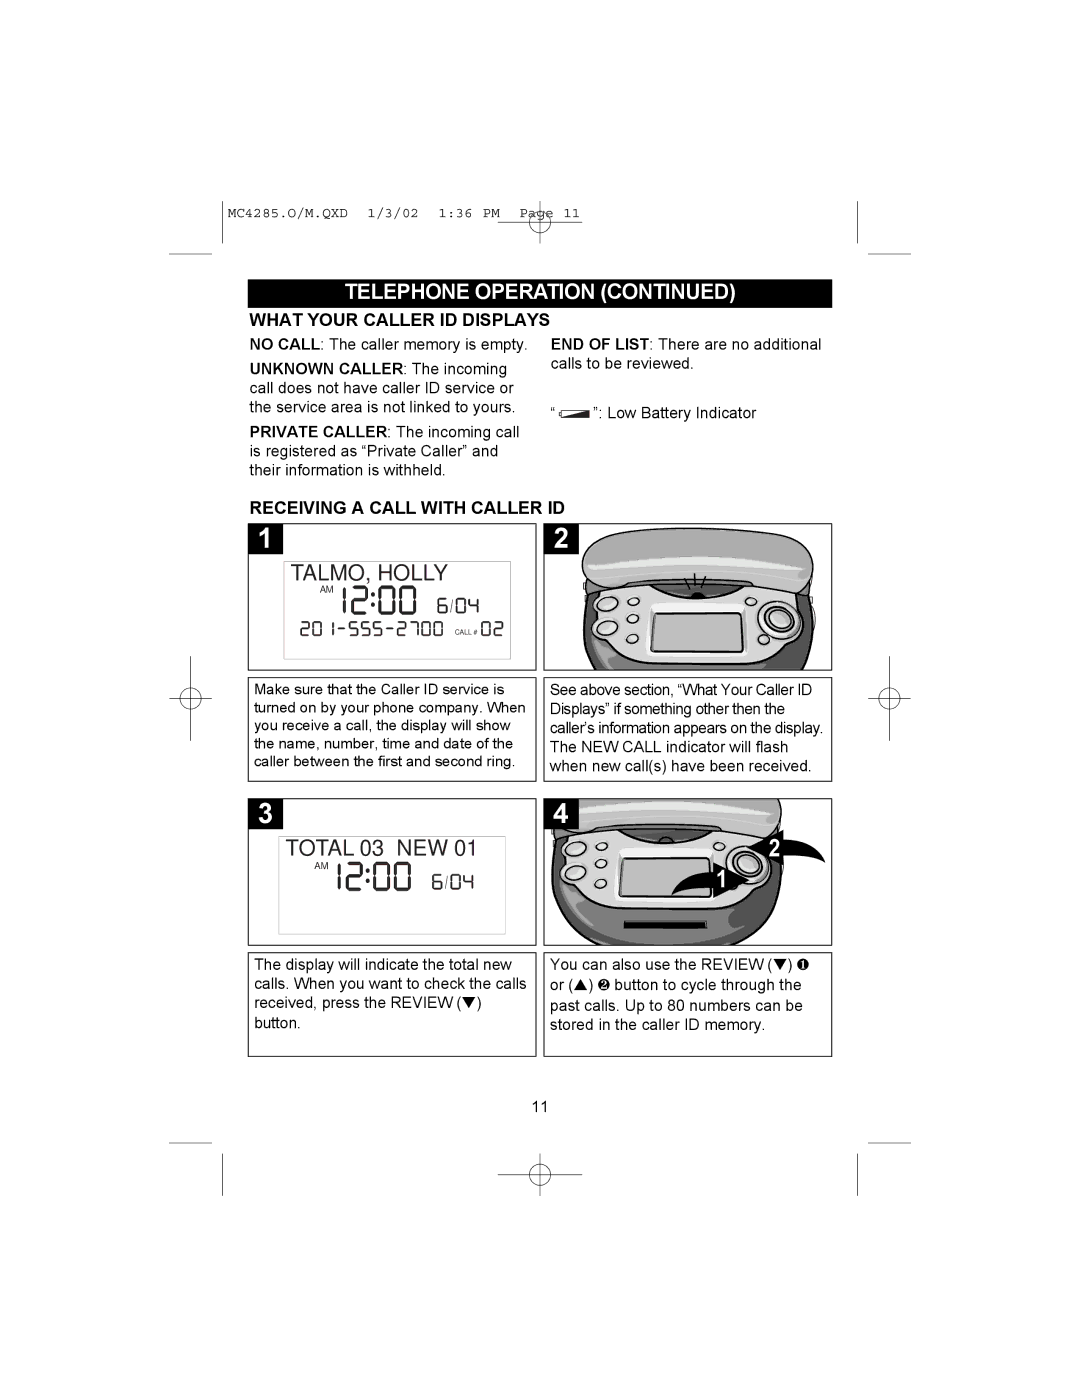 Memorex MC4285 operating instructions What Your Caller ID Displays, Receiving a Call with Caller ID 